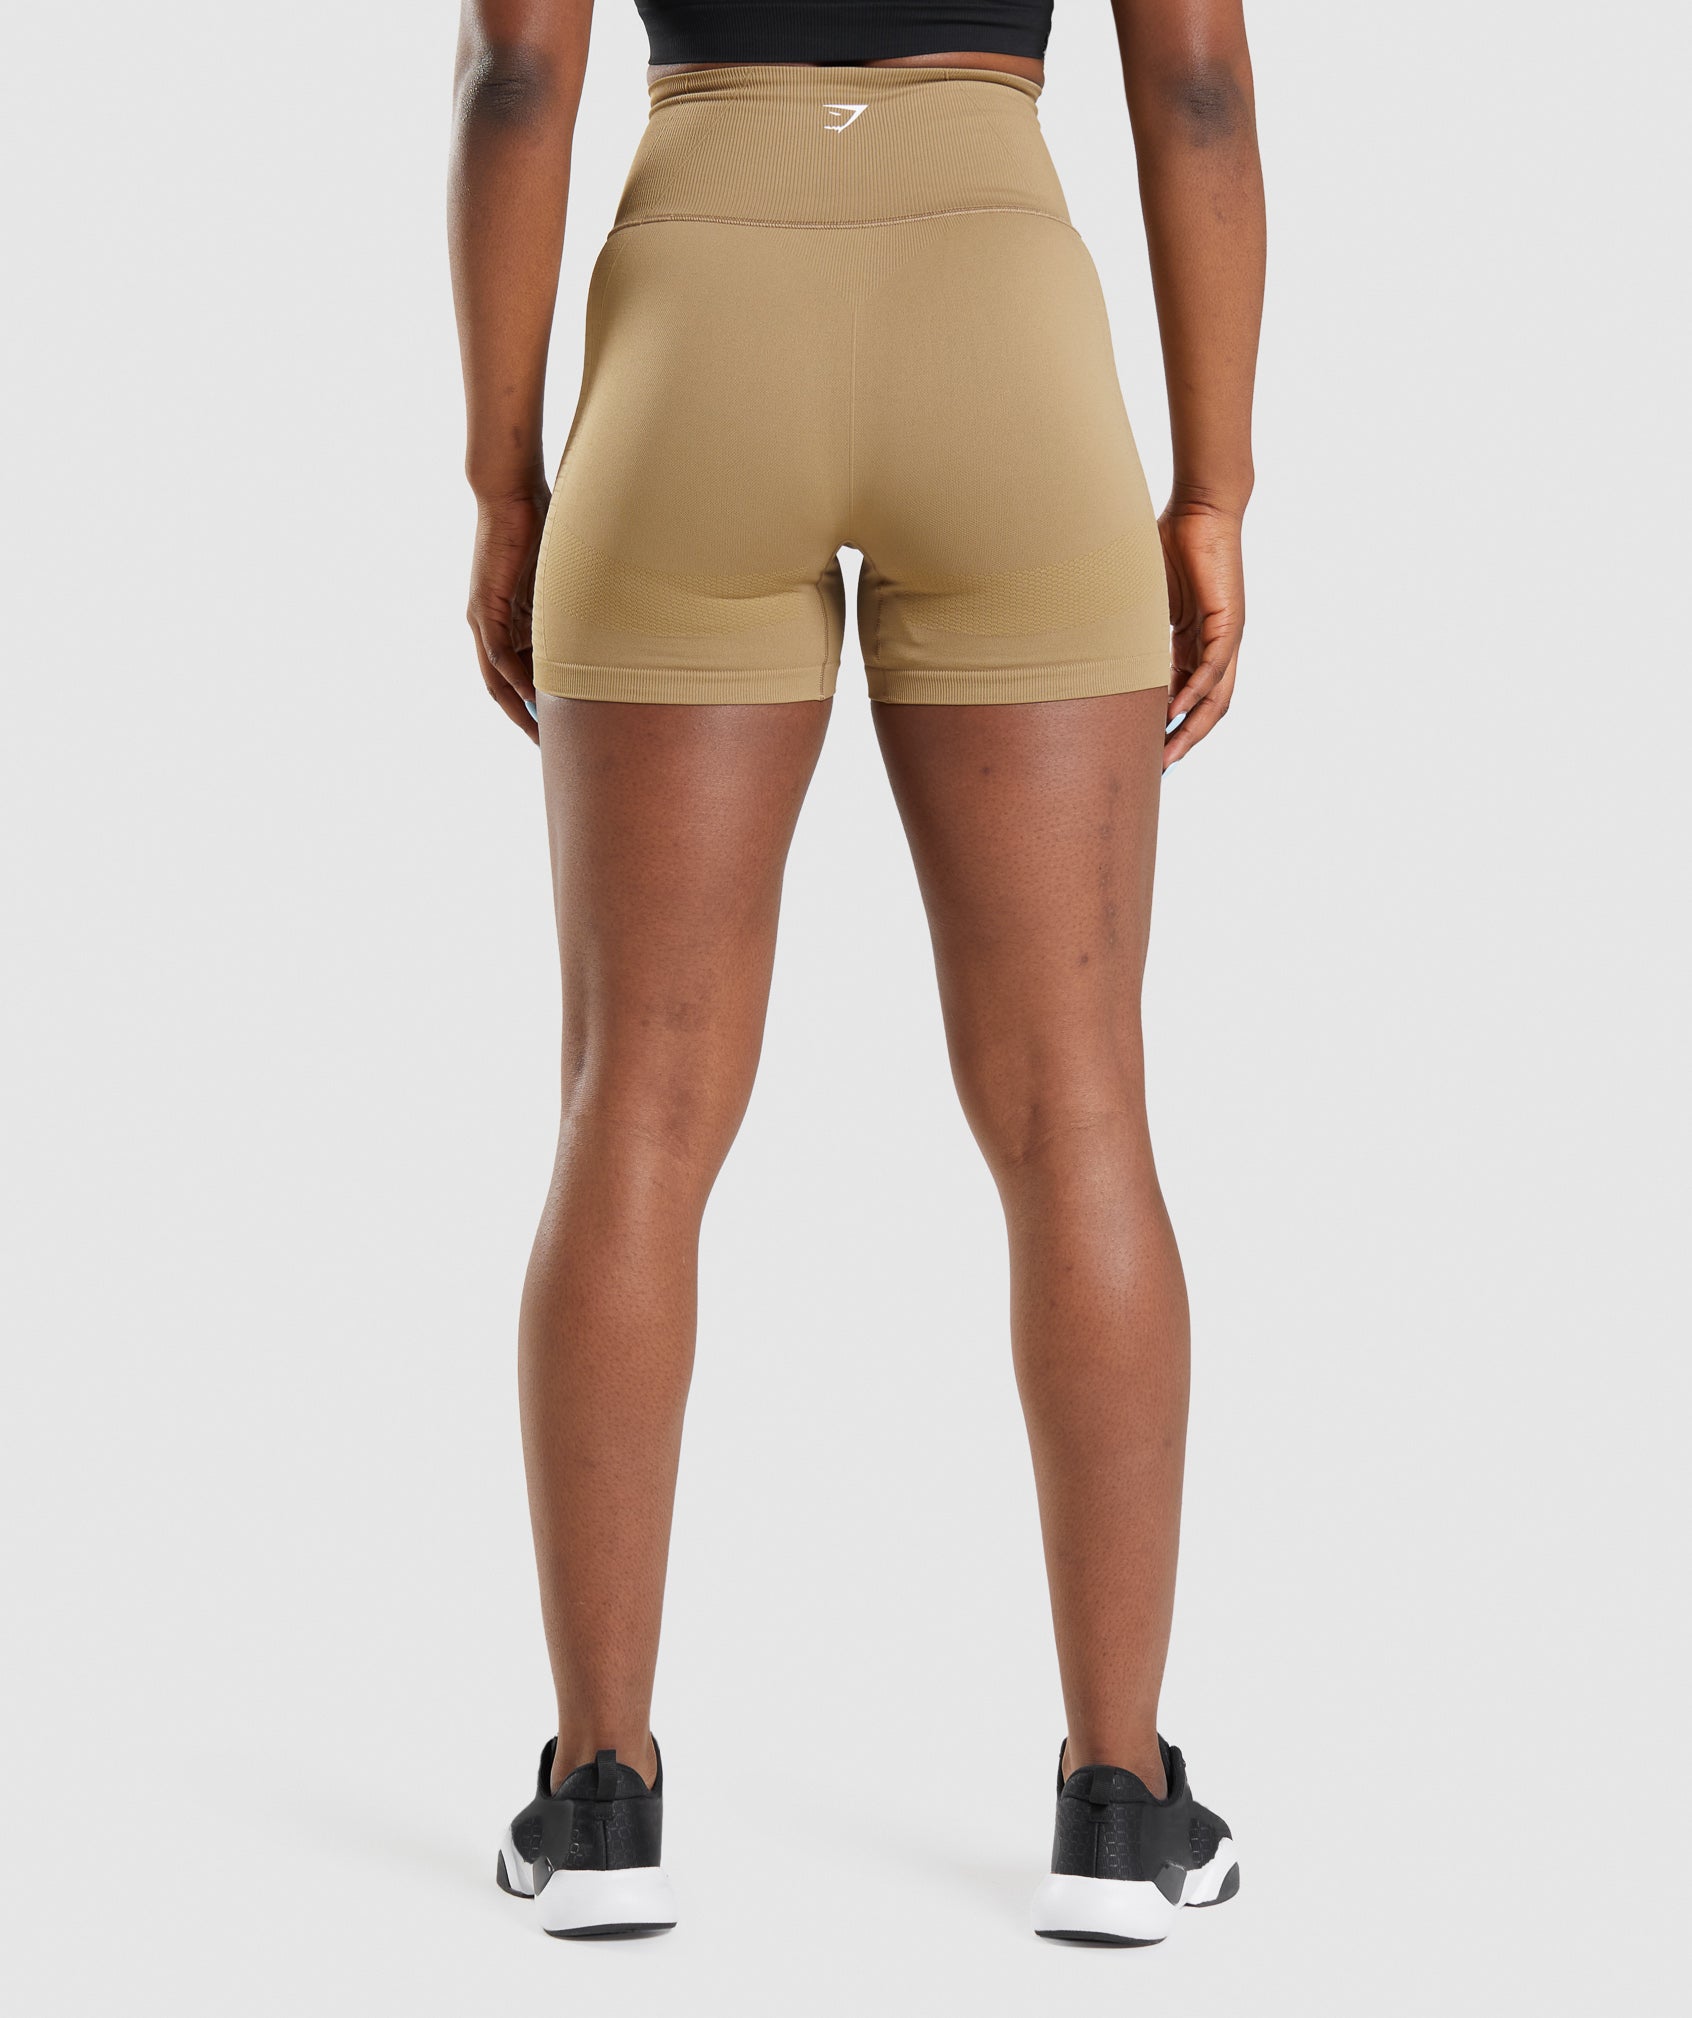 Energy Seamless Shorts in Biscotti Brown - view 2